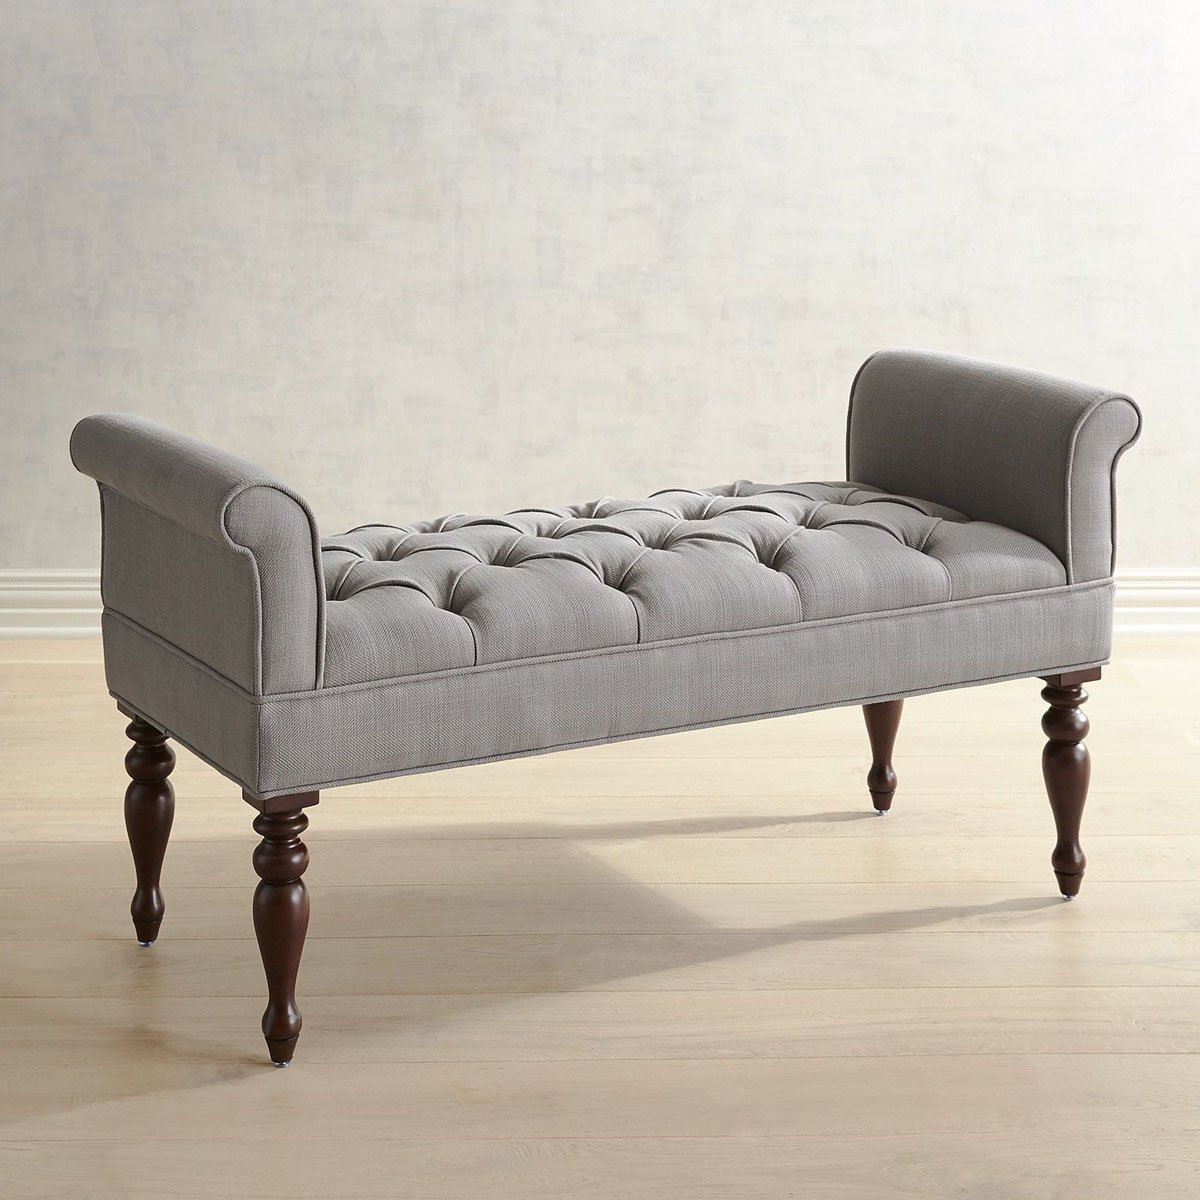 Banca Pewter Audrey Tufted Pier 1 Imports